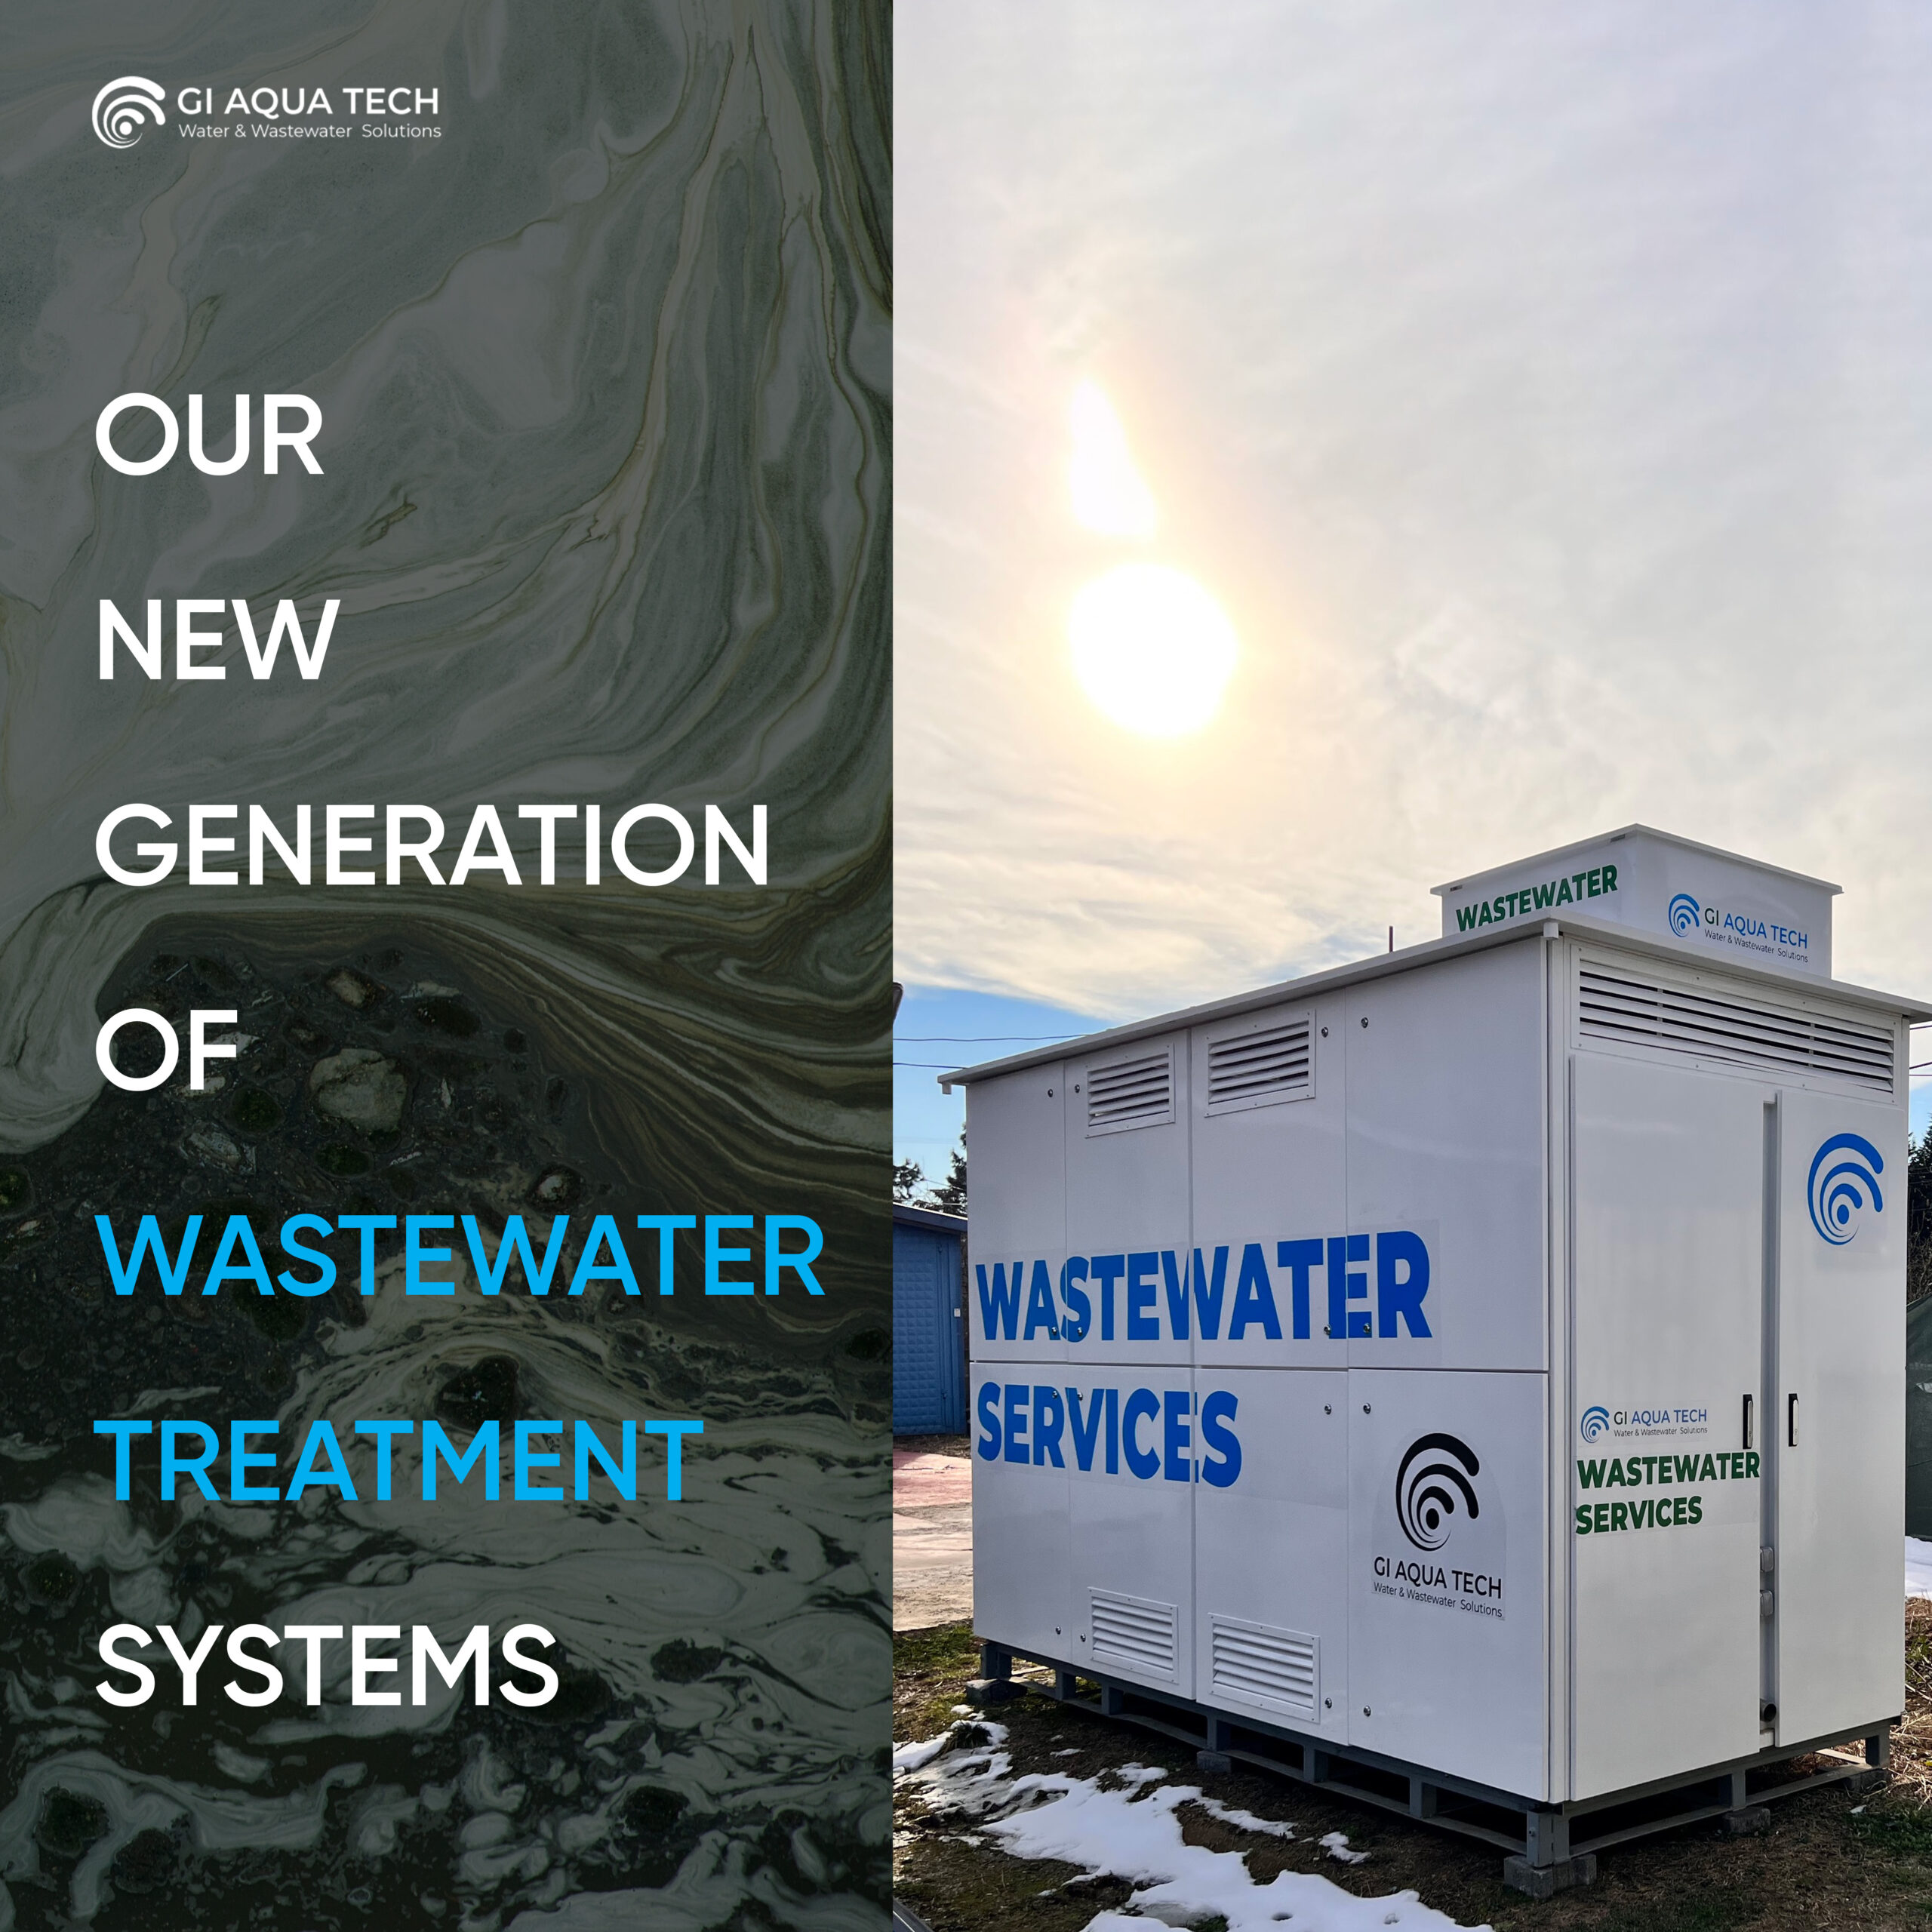 Our new generation of wastewater treatment systems